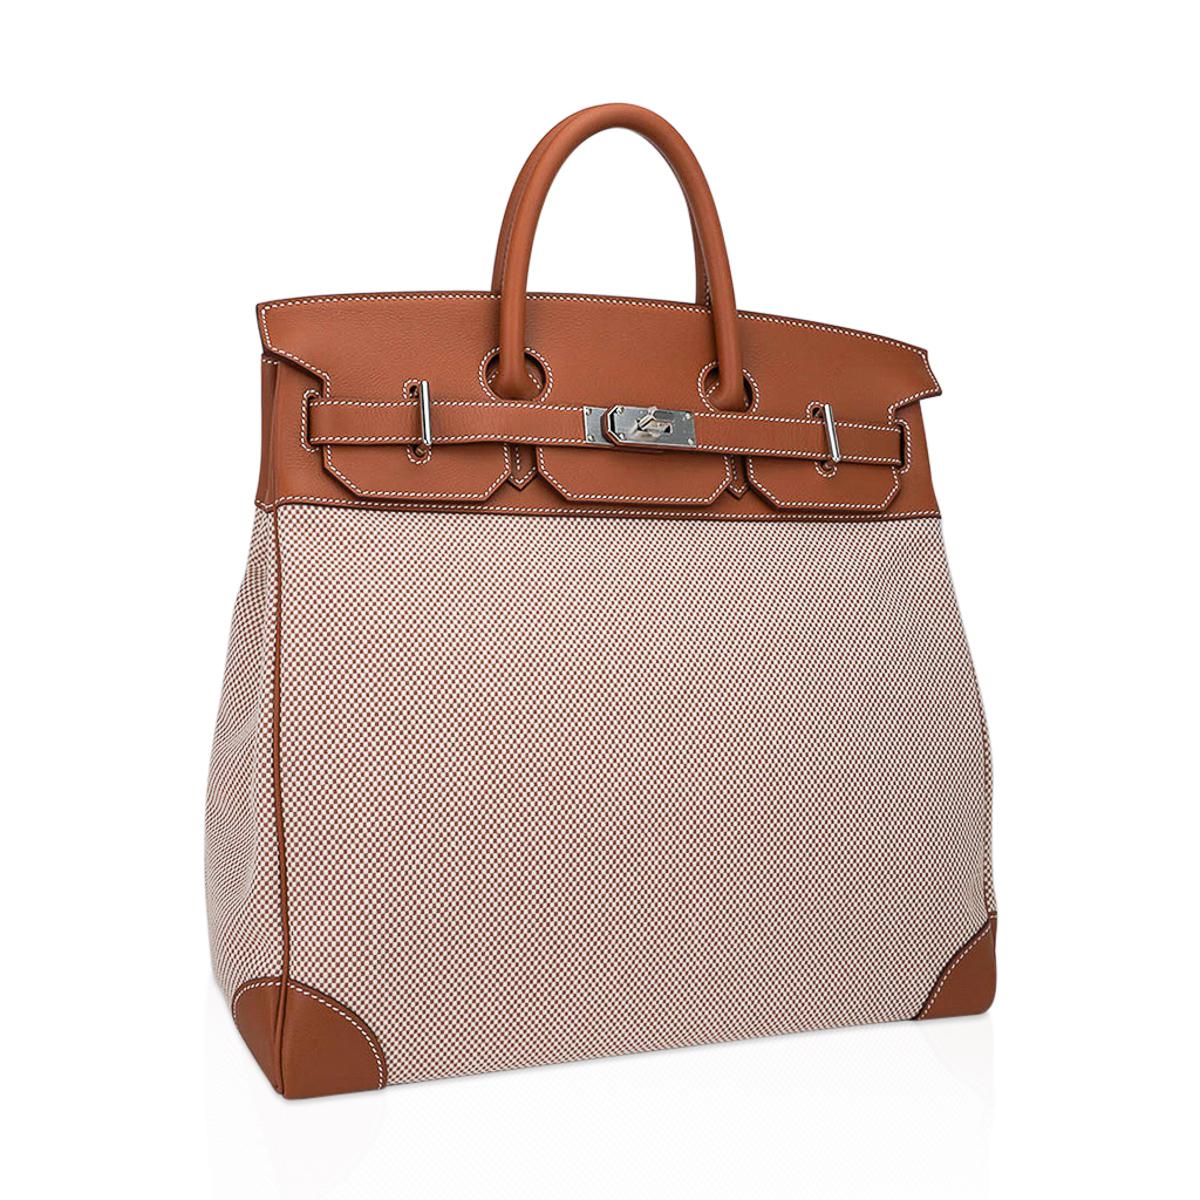 Mightychic offers a rare Hermes HAC 40 bag featured in Gold with Gold and Ecru Toile. 
Gold Evercolor leather is accentuated with palladium hardware.
A chic and masculine combination for this rare Hermes classic bag.
This timeless Hermes tote bag is